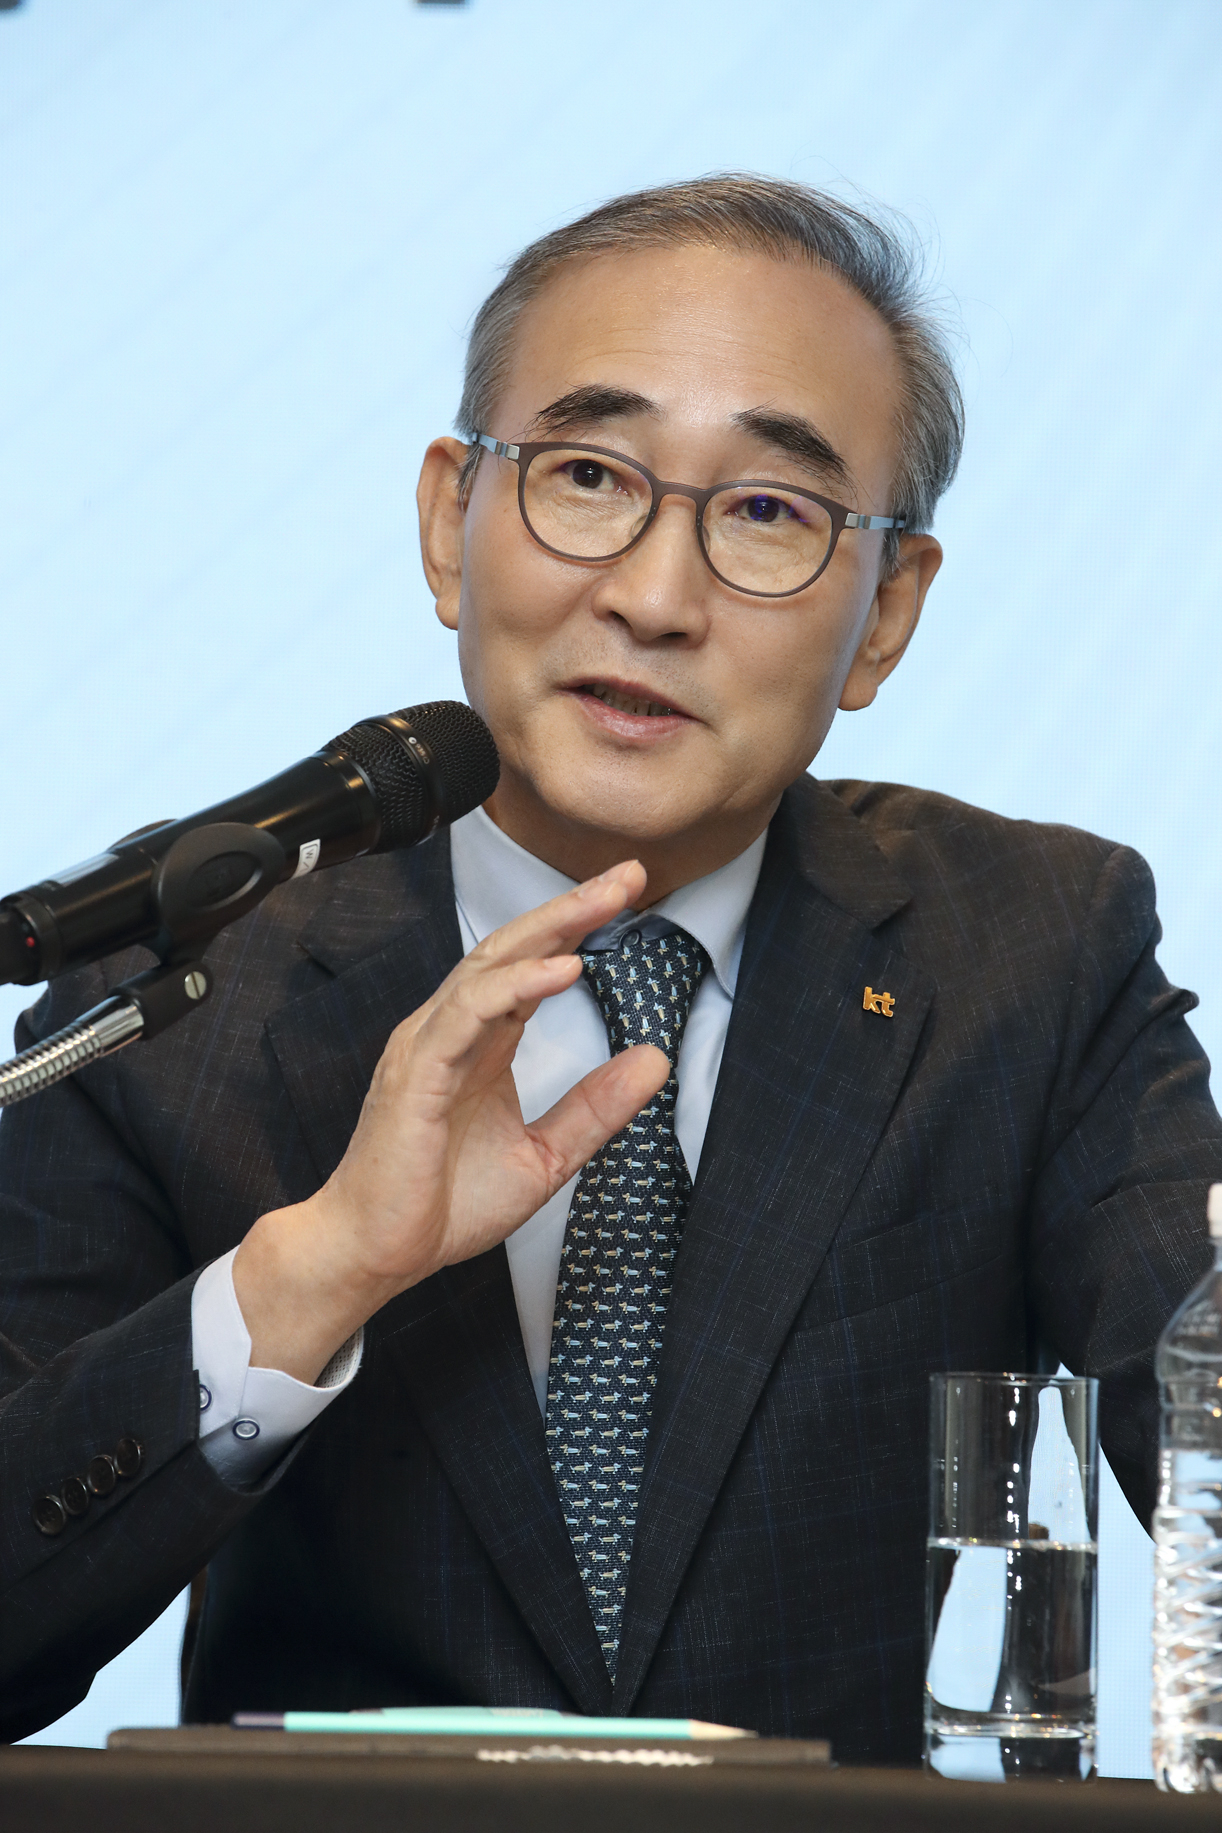 KT Corp.'s new CEO Kim Young-shub speaks during his first meeting with local reporters in Seoul on Thursday, after taking office last week. (KT Corp.)